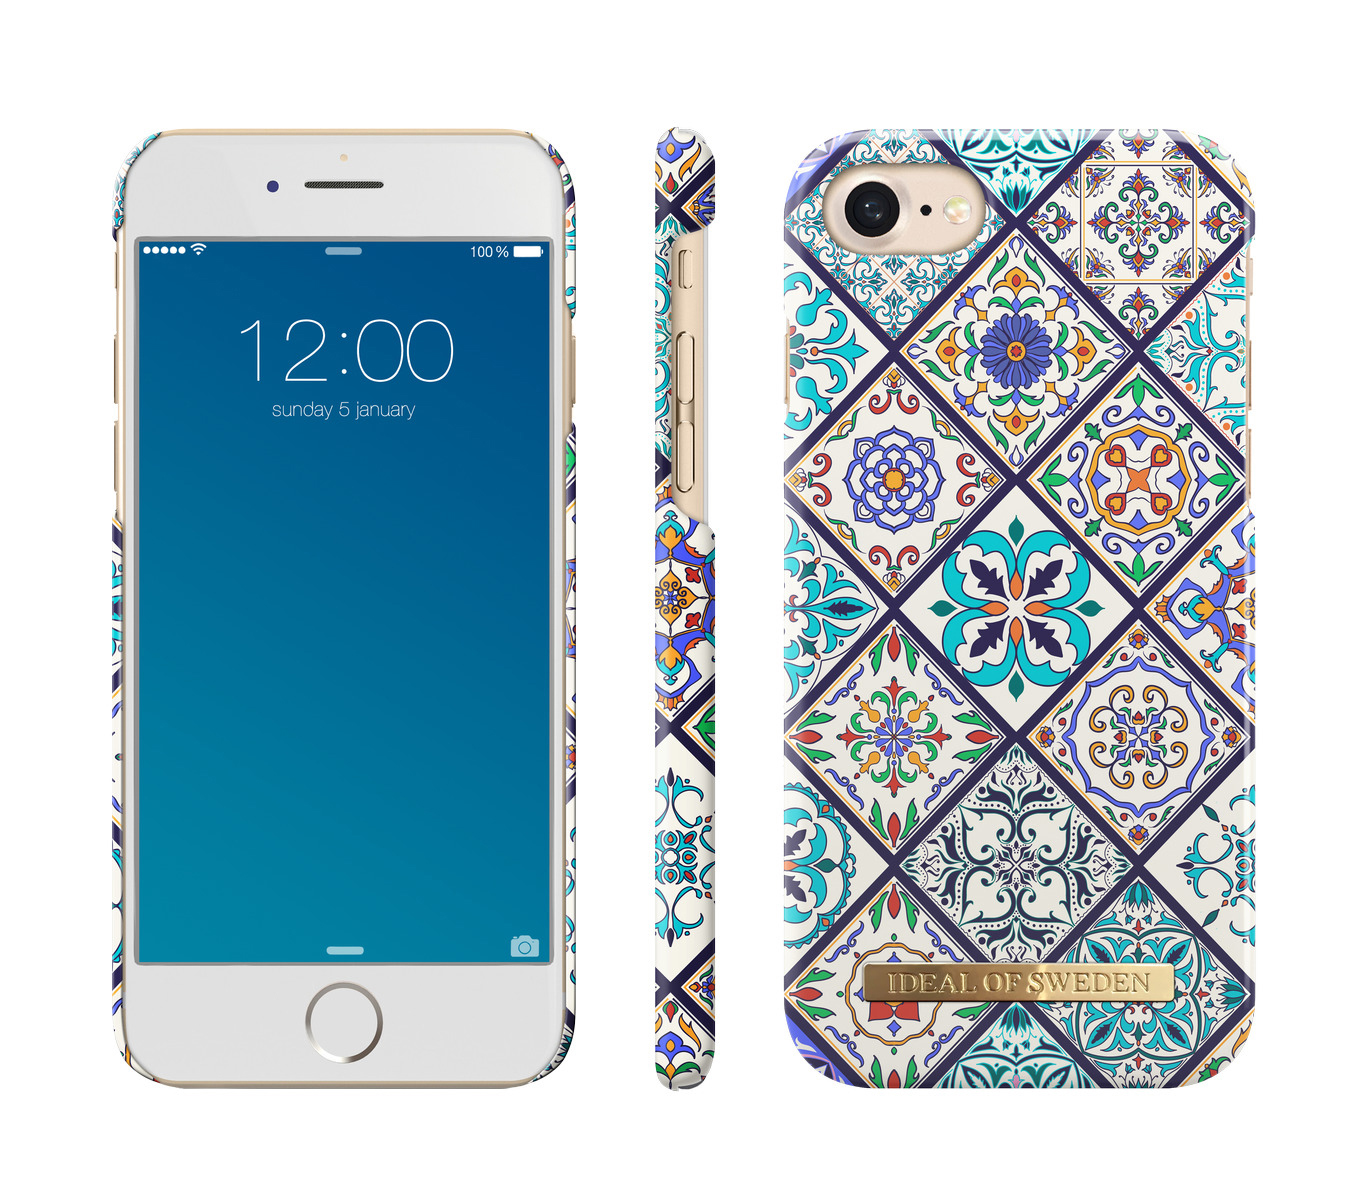 6, IDEAL Apple, iPhone 8, SWEDEN iPhone 7, iPhone Fashion, Backcover, Mosaic OF